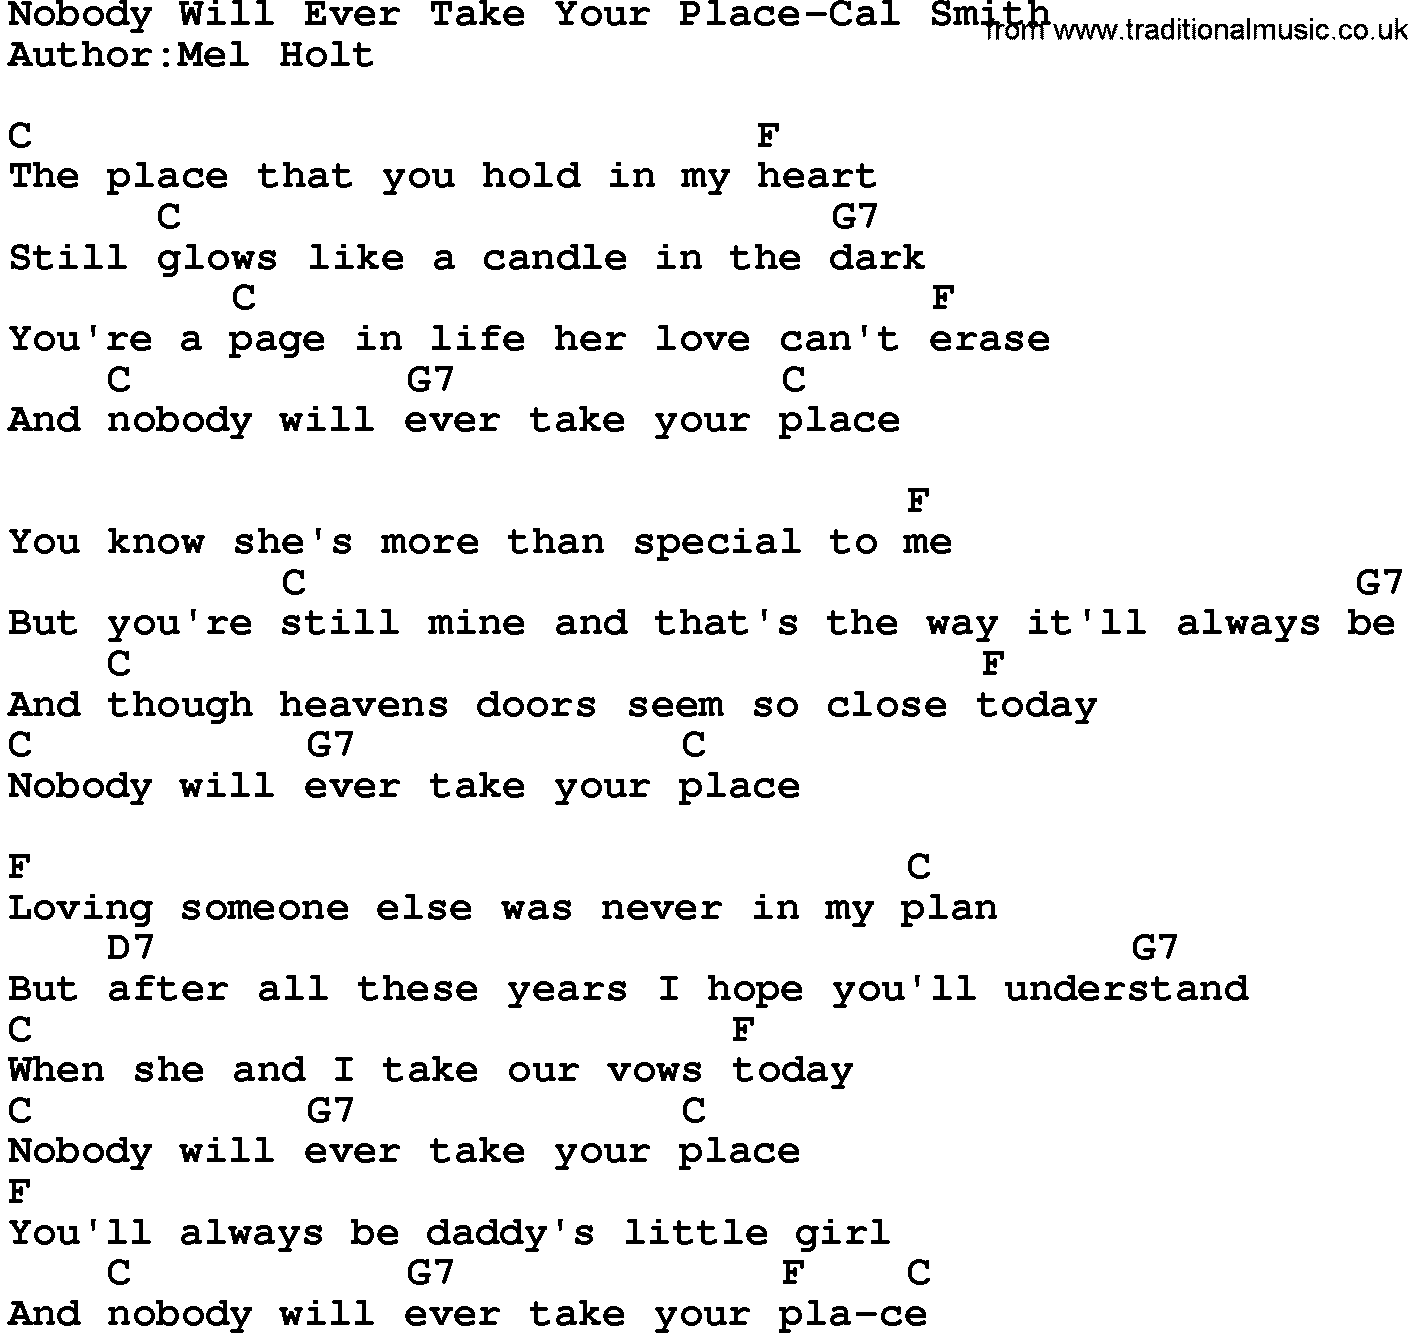 Country music song: Nobody Will Ever Take Your Place-Cal Smith lyrics and chords